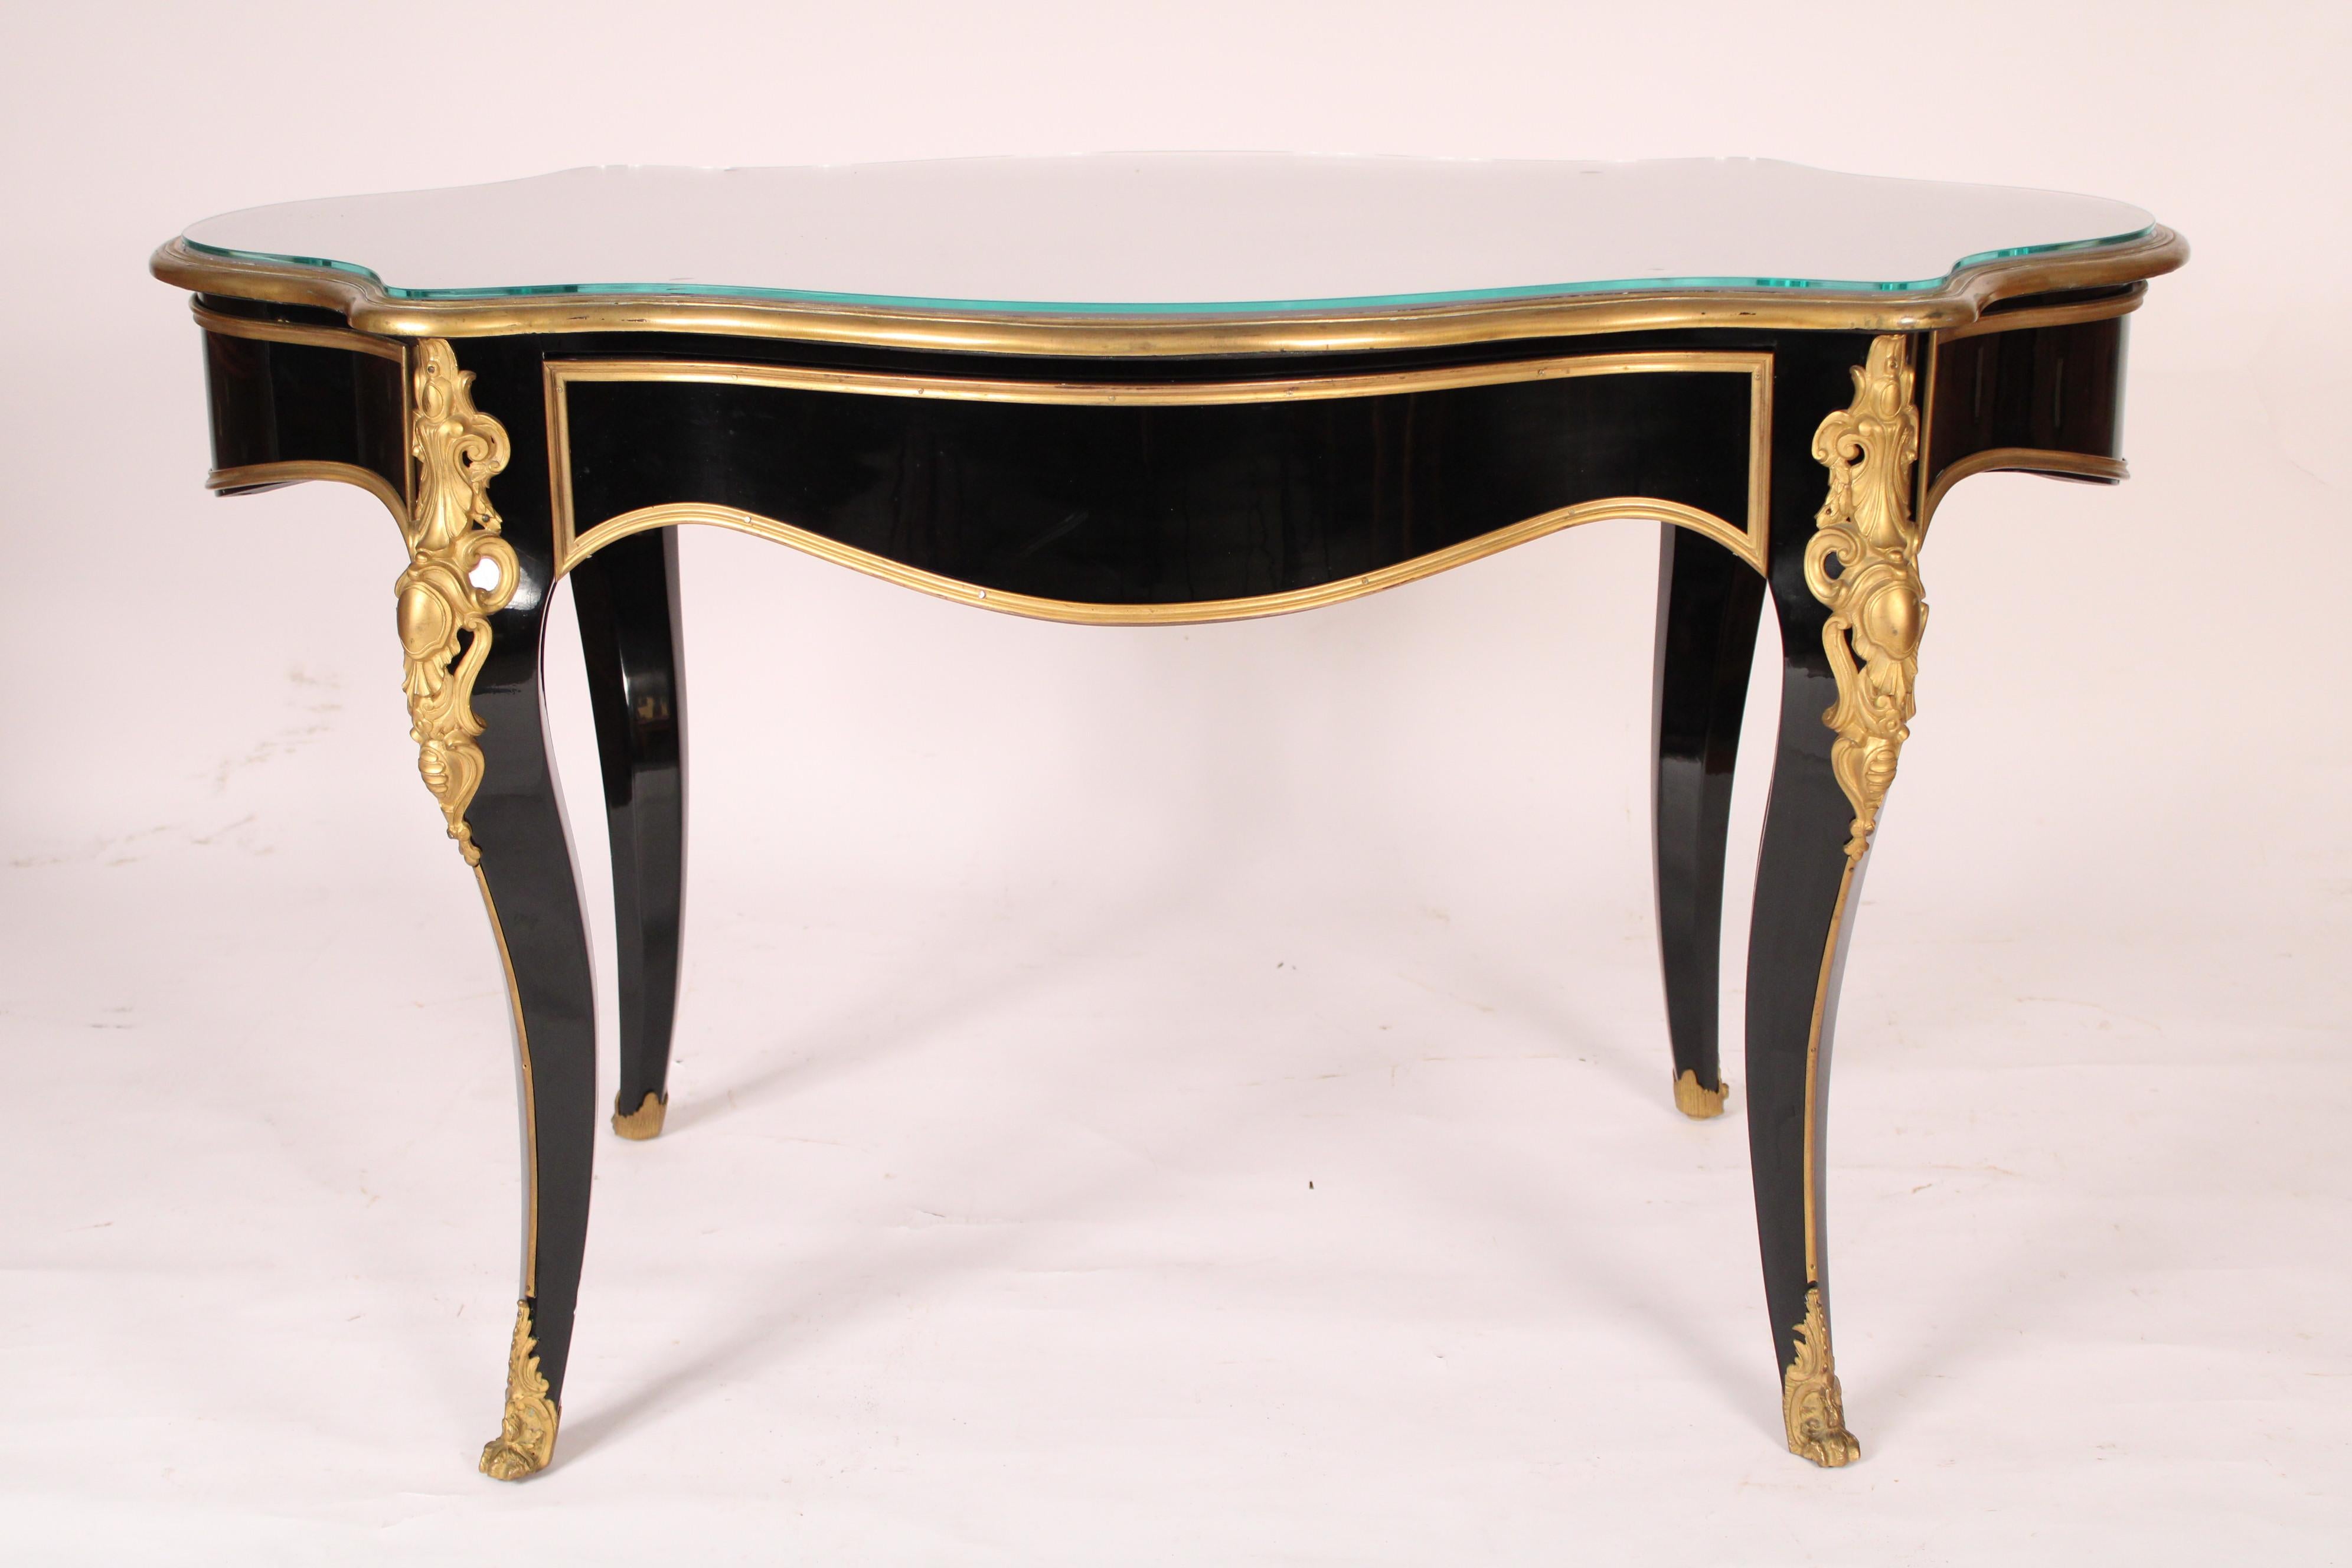 Antique Napoleon III style black lacquer and gilt bronze mounted writing / center table, late 19th century. With a black lacquer top banded with gilt bronze and a later glass top, a frieze drawer on one side, resting on black lacquer cabriole legs